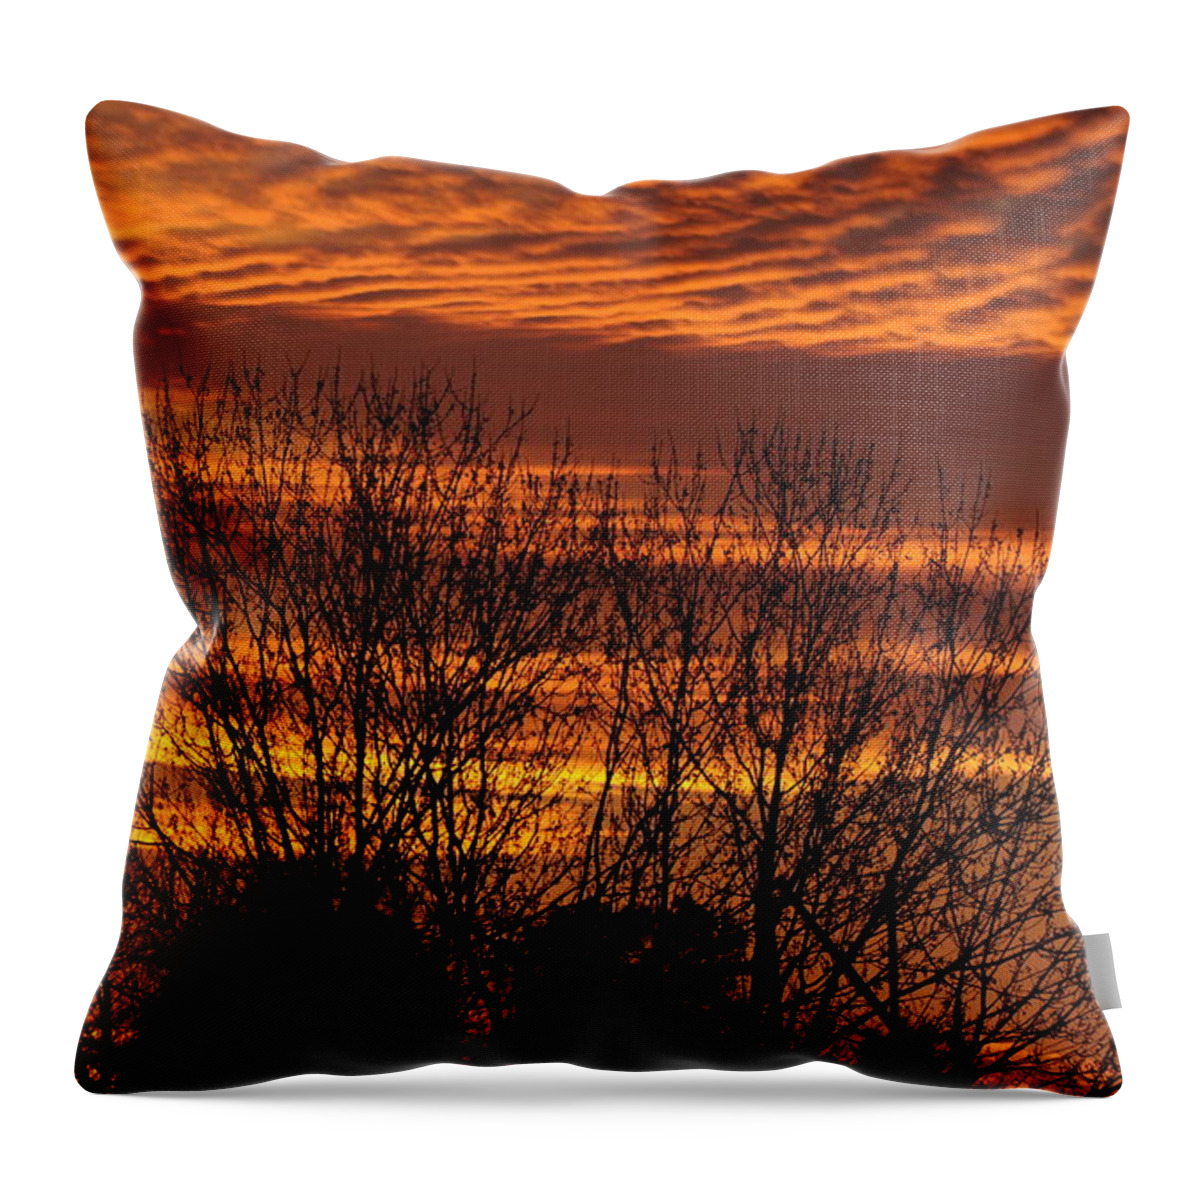 Landscape Throw Pillow featuring the photograph Sedative Sky by Jack Harries